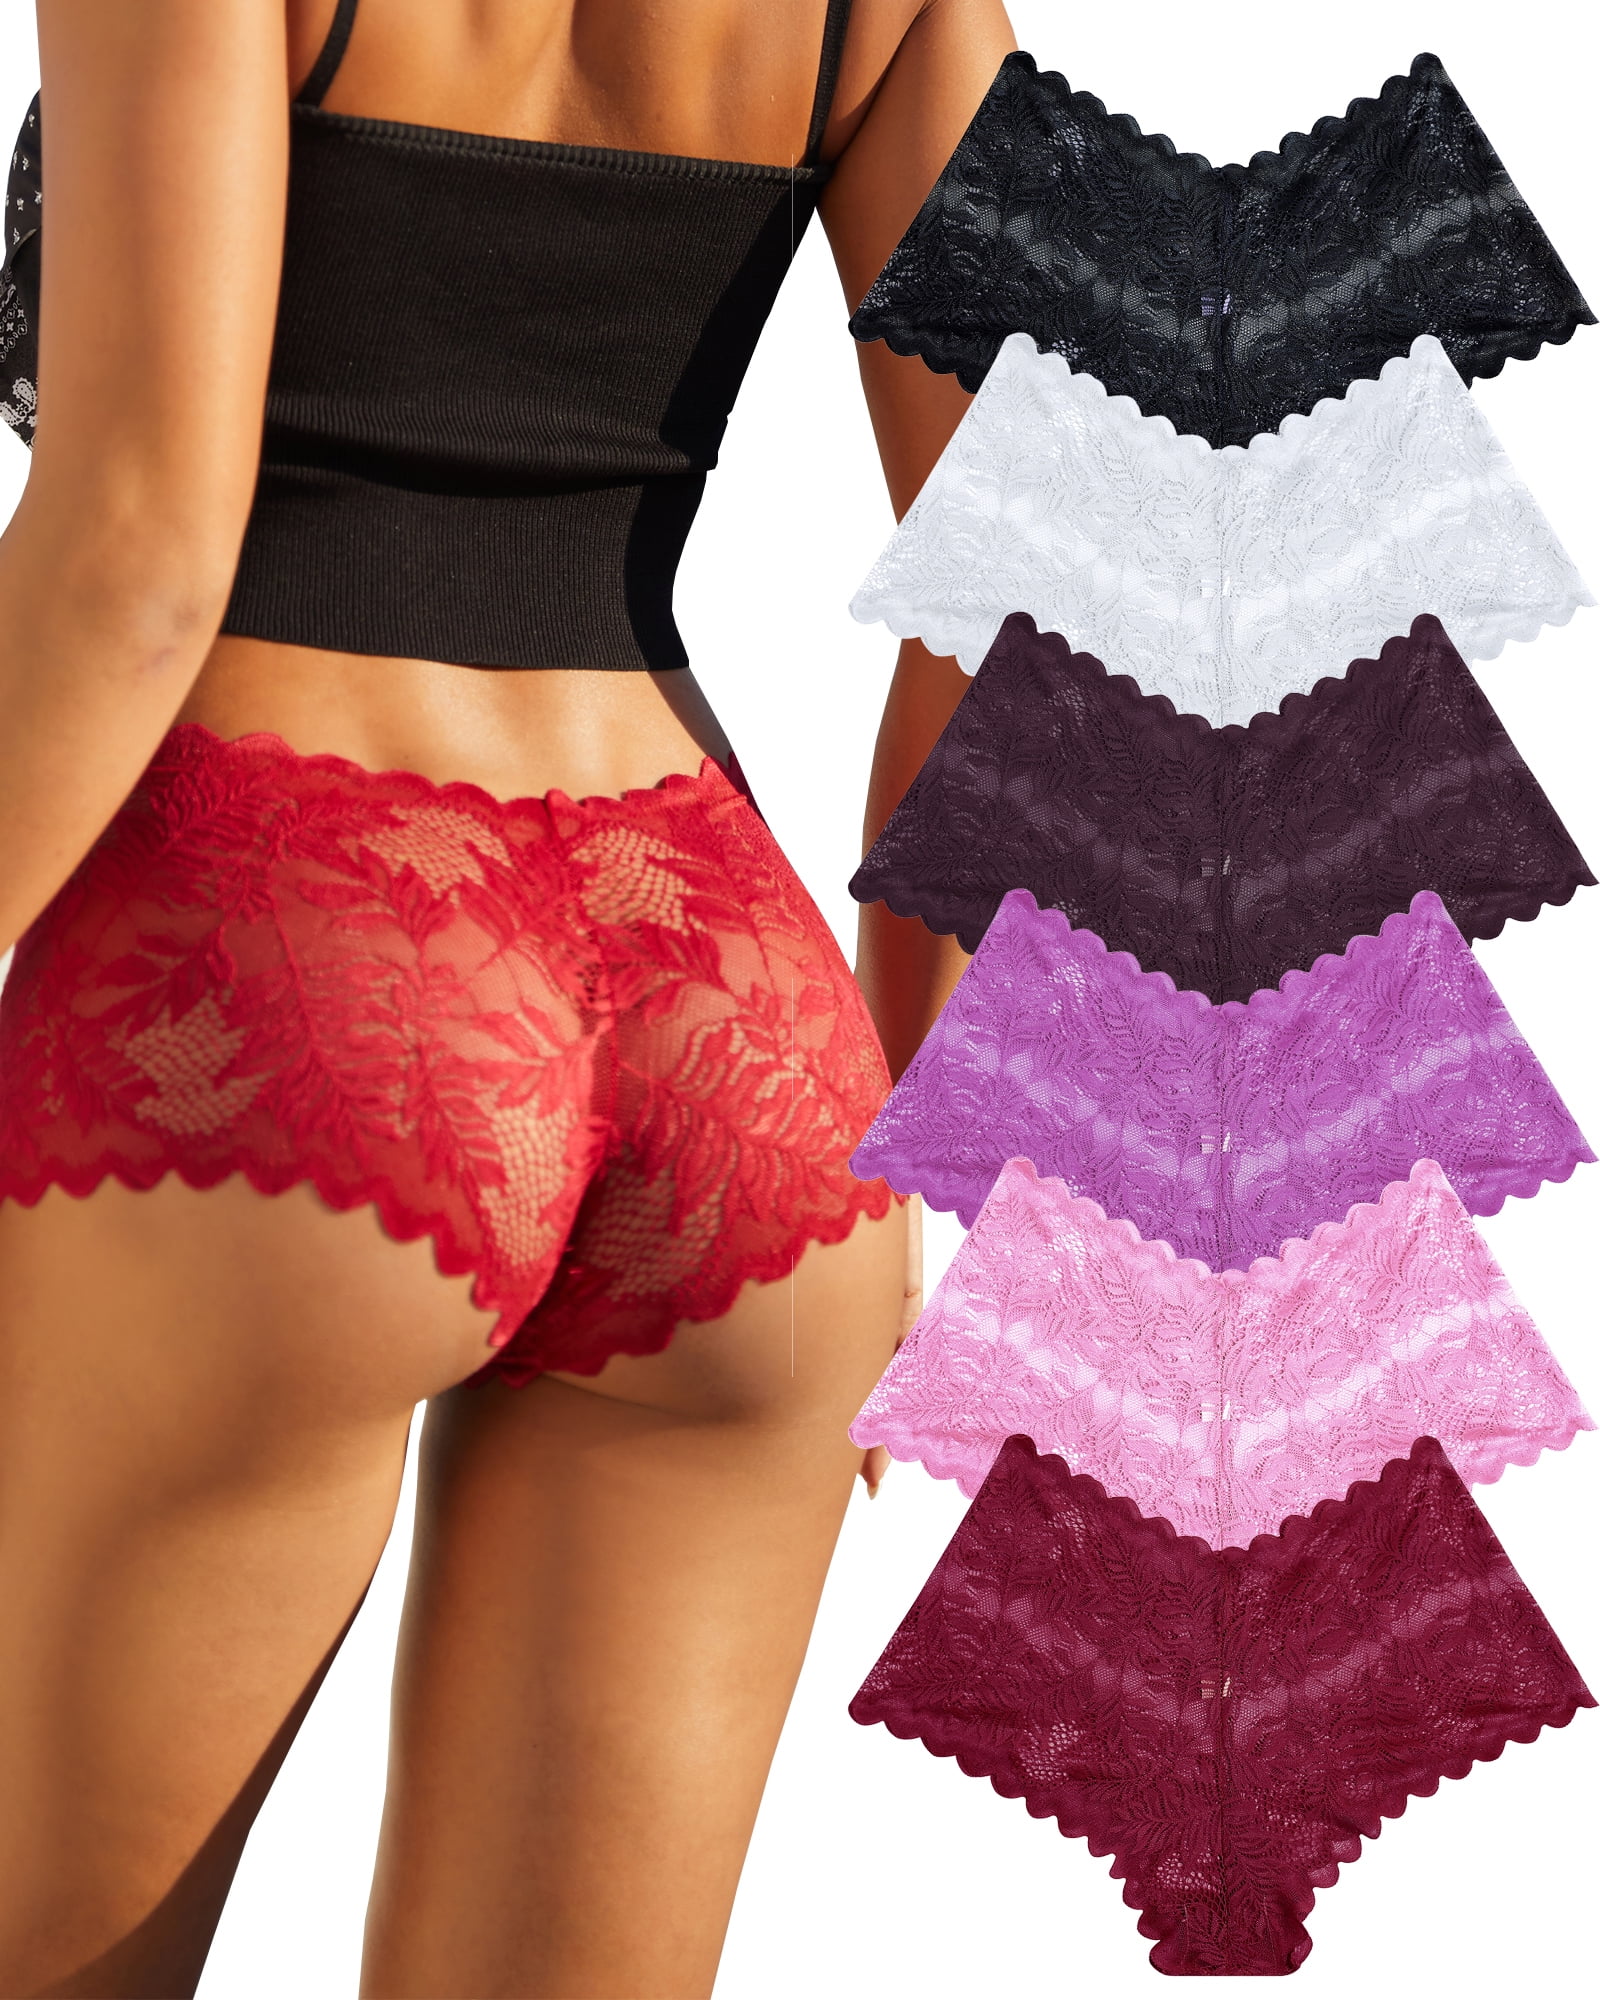 Women's Vanity Fair 13011 Perfectly Yours Lace Nouveau Brief Panty - 3 Pack  (Multi 2108 6) 